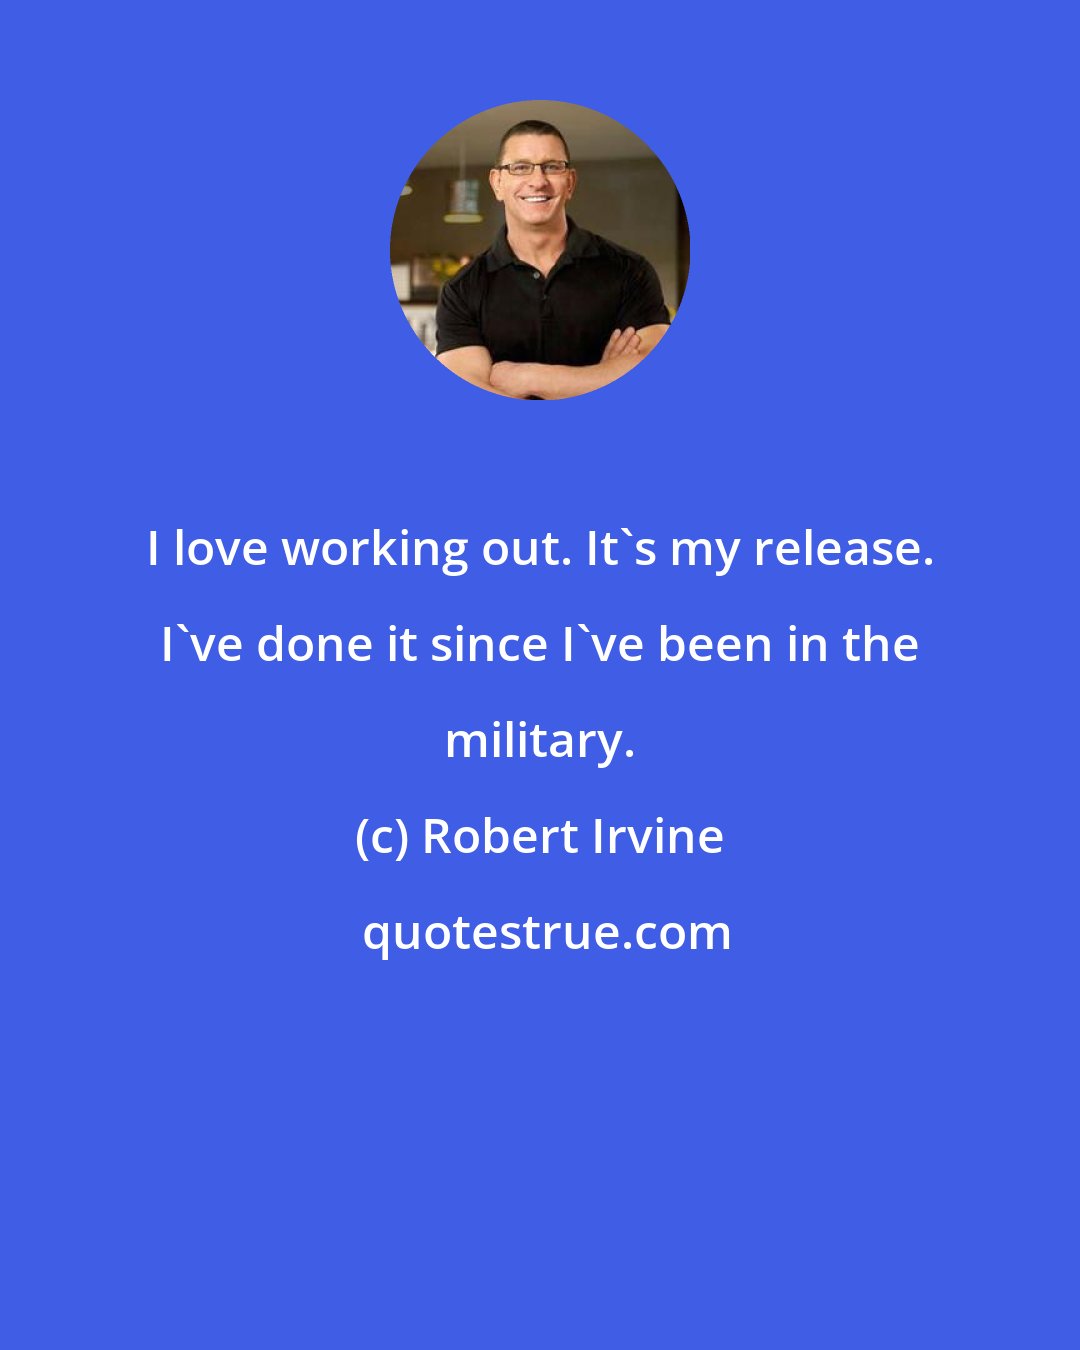 Robert Irvine: I love working out. It's my release. I've done it since I've been in the military.